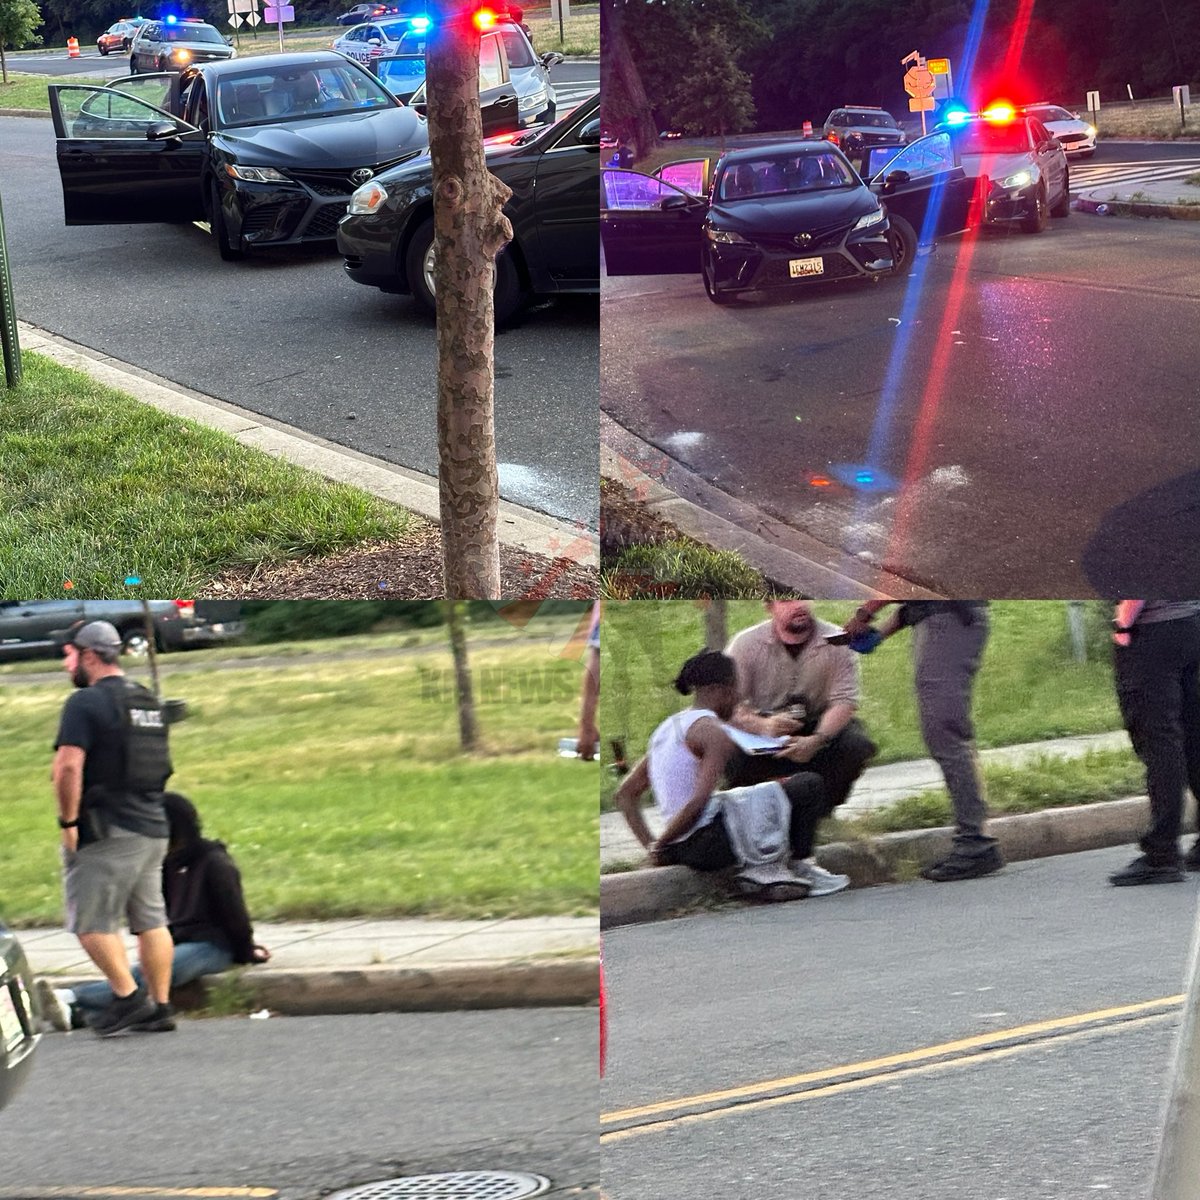 ANOTHER PURSUIT W/ BAILOUT and  ARRESTS MADE: Mpd along with Pgpd is on the scene of a pursuit after a carjacked vehicle out of MD wanted for ADW after a shooting in D.C was spotted near Branch Ave. the collision/ Bailout with 4 in Custody is at the 2800 Bl. Of  sheridan Rd S.E